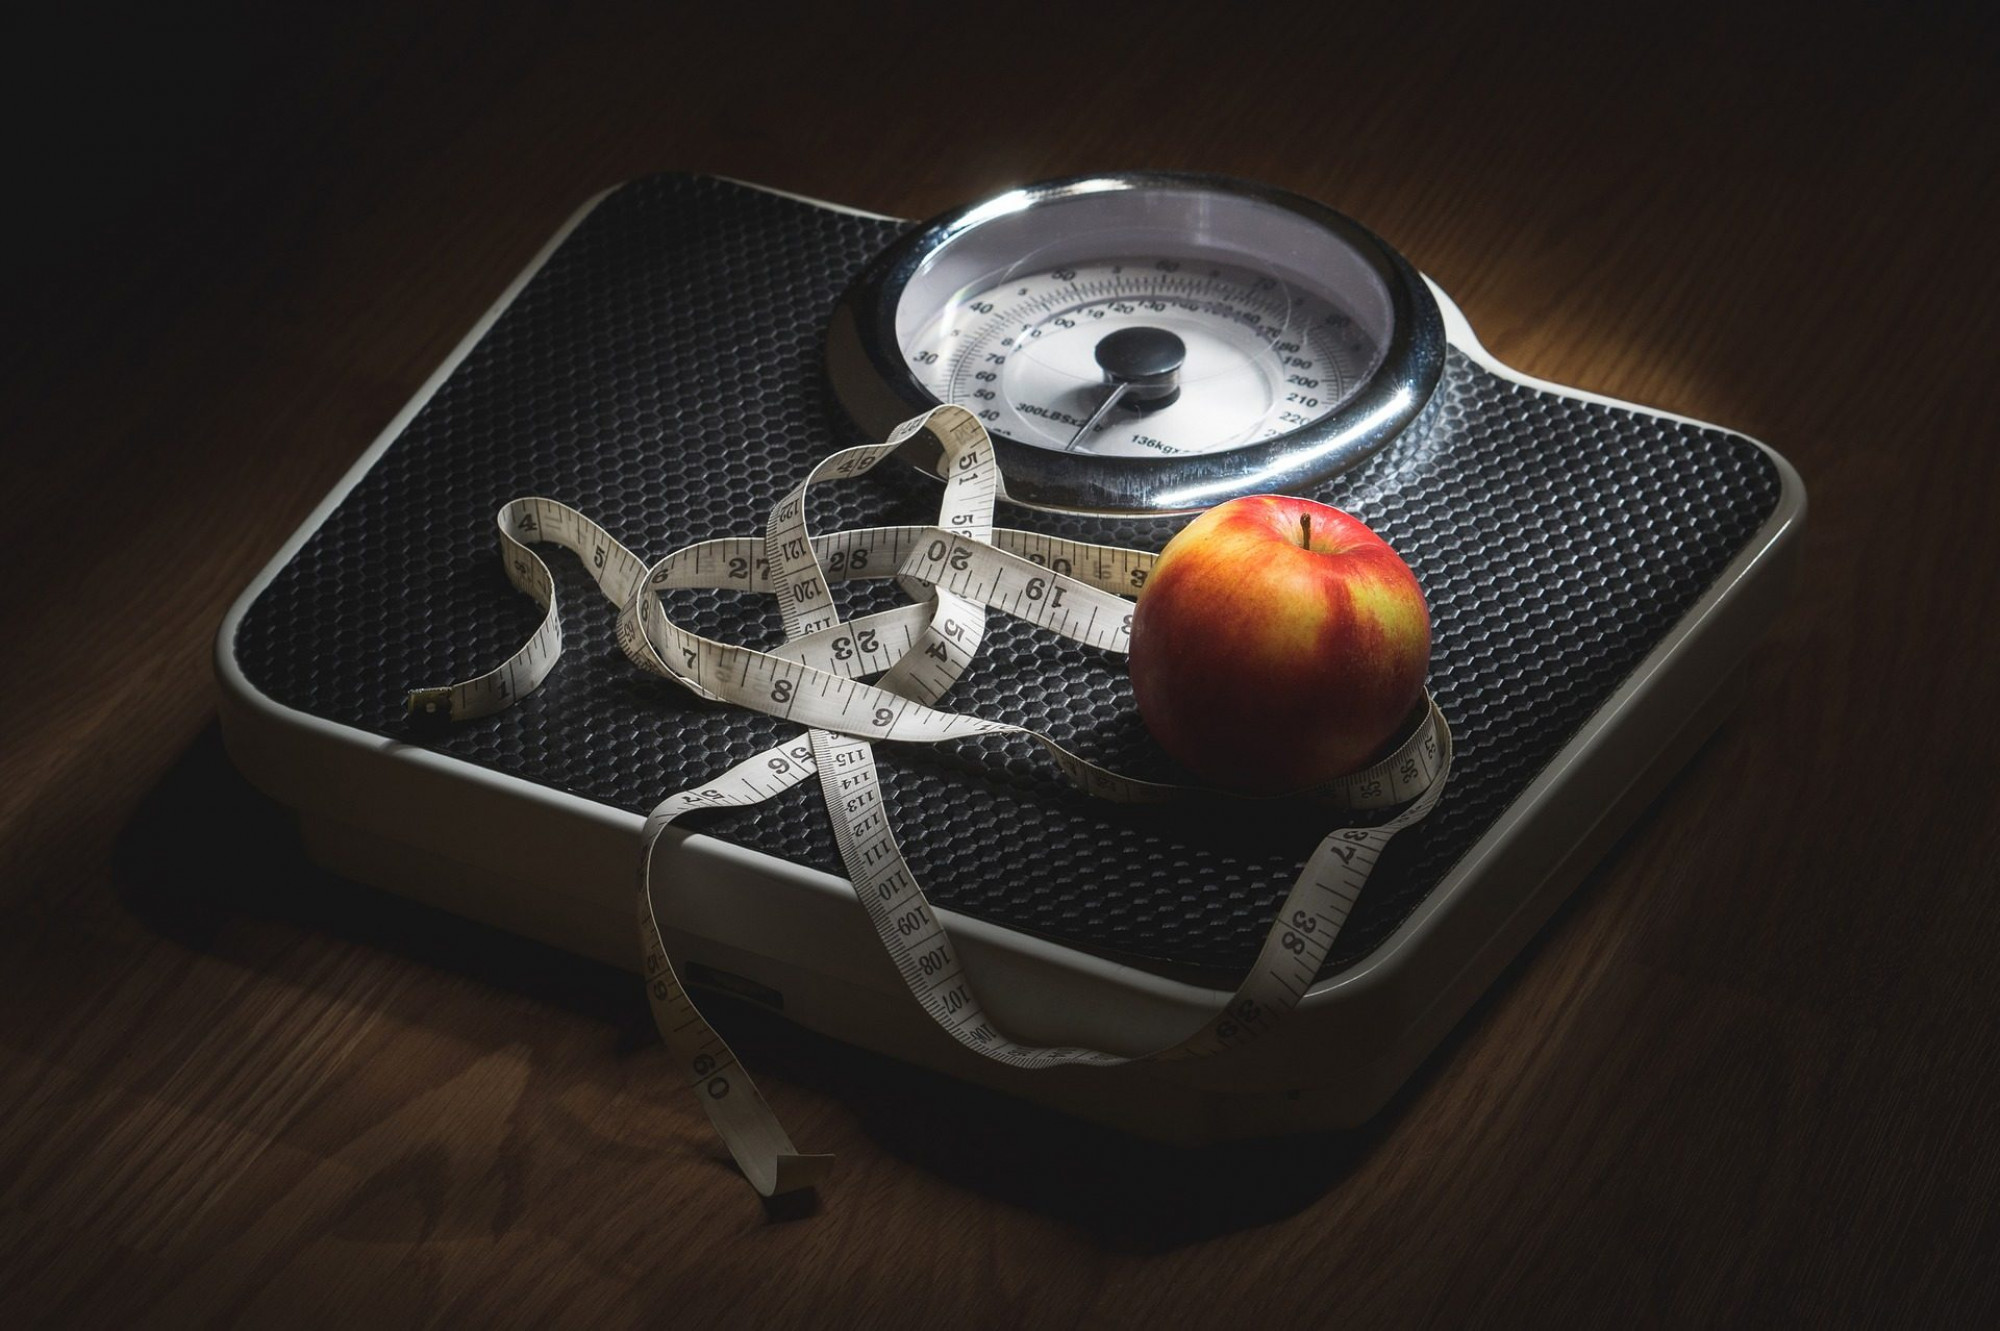 Weighing scales with measuring tape and apple